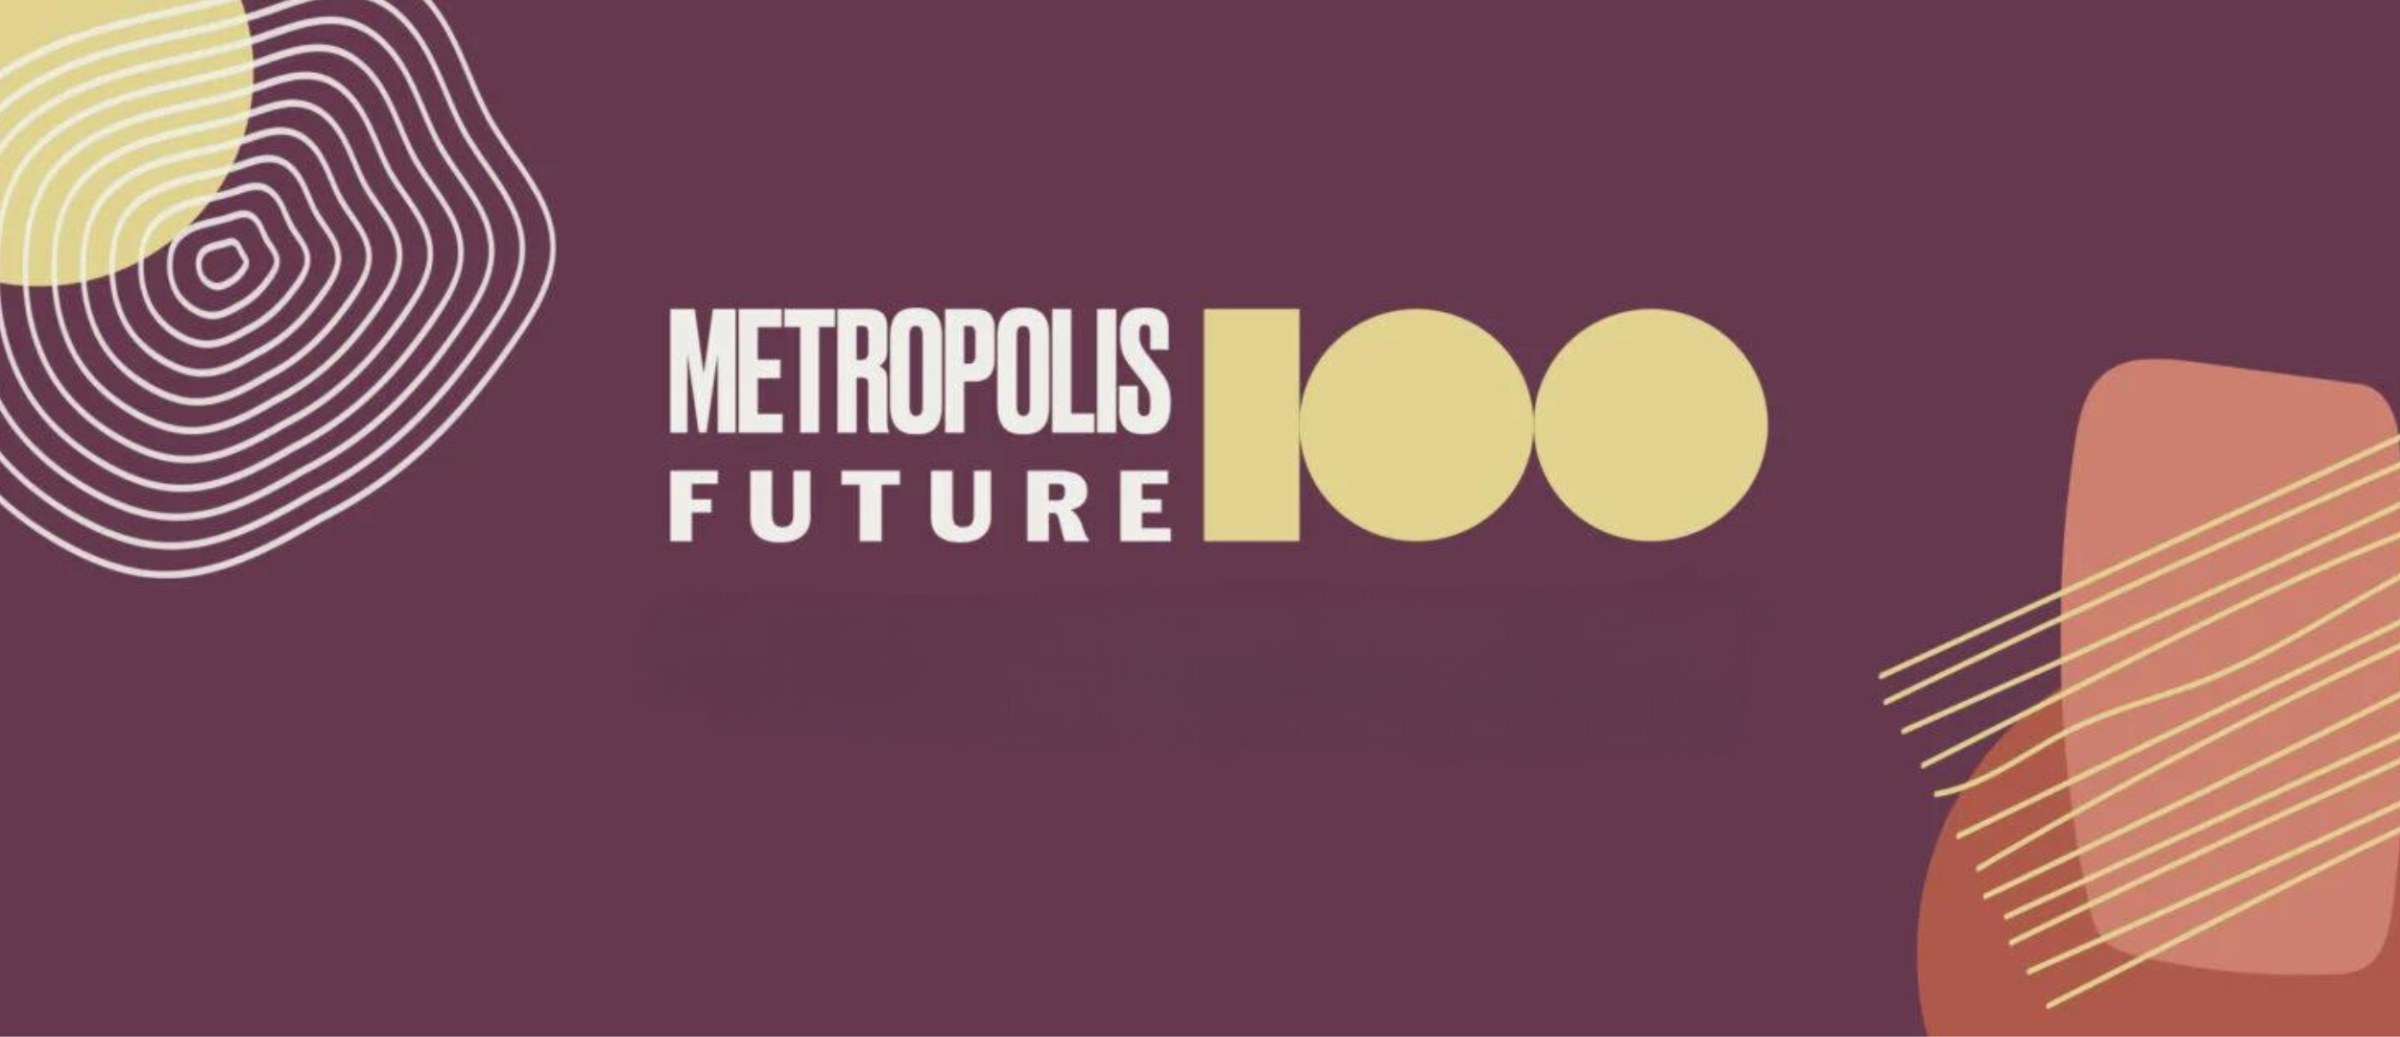 Digital landscape-oriented poster titled "Metropolis Future100" in the middle and abstract shapes on the left and right sides of the poster